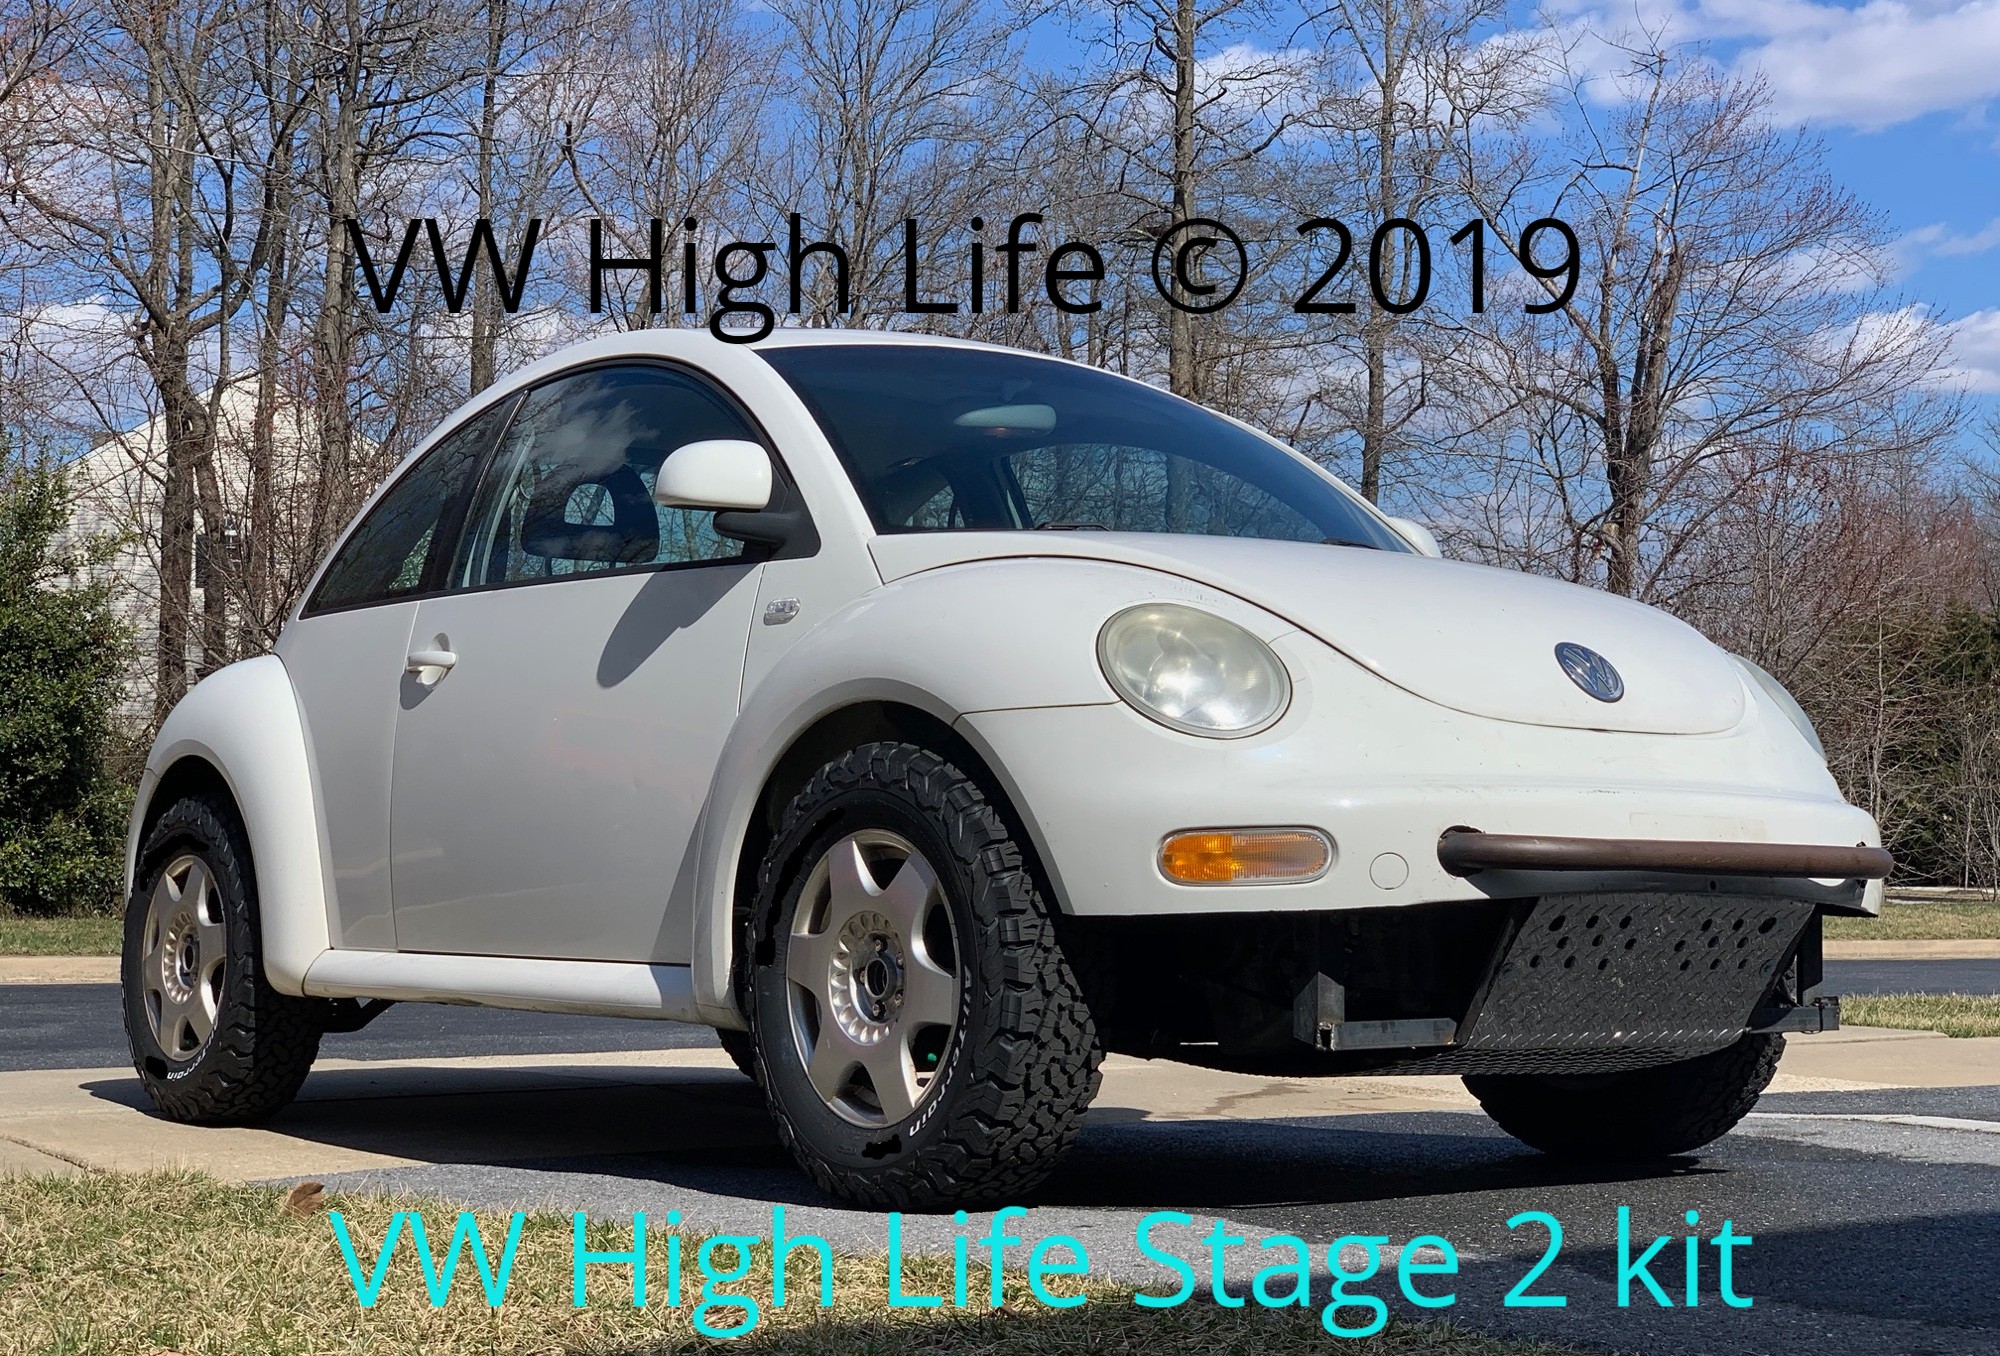 VW Beetle with 26 inch Off Road Tires lifted 2 inches in the rear & front 